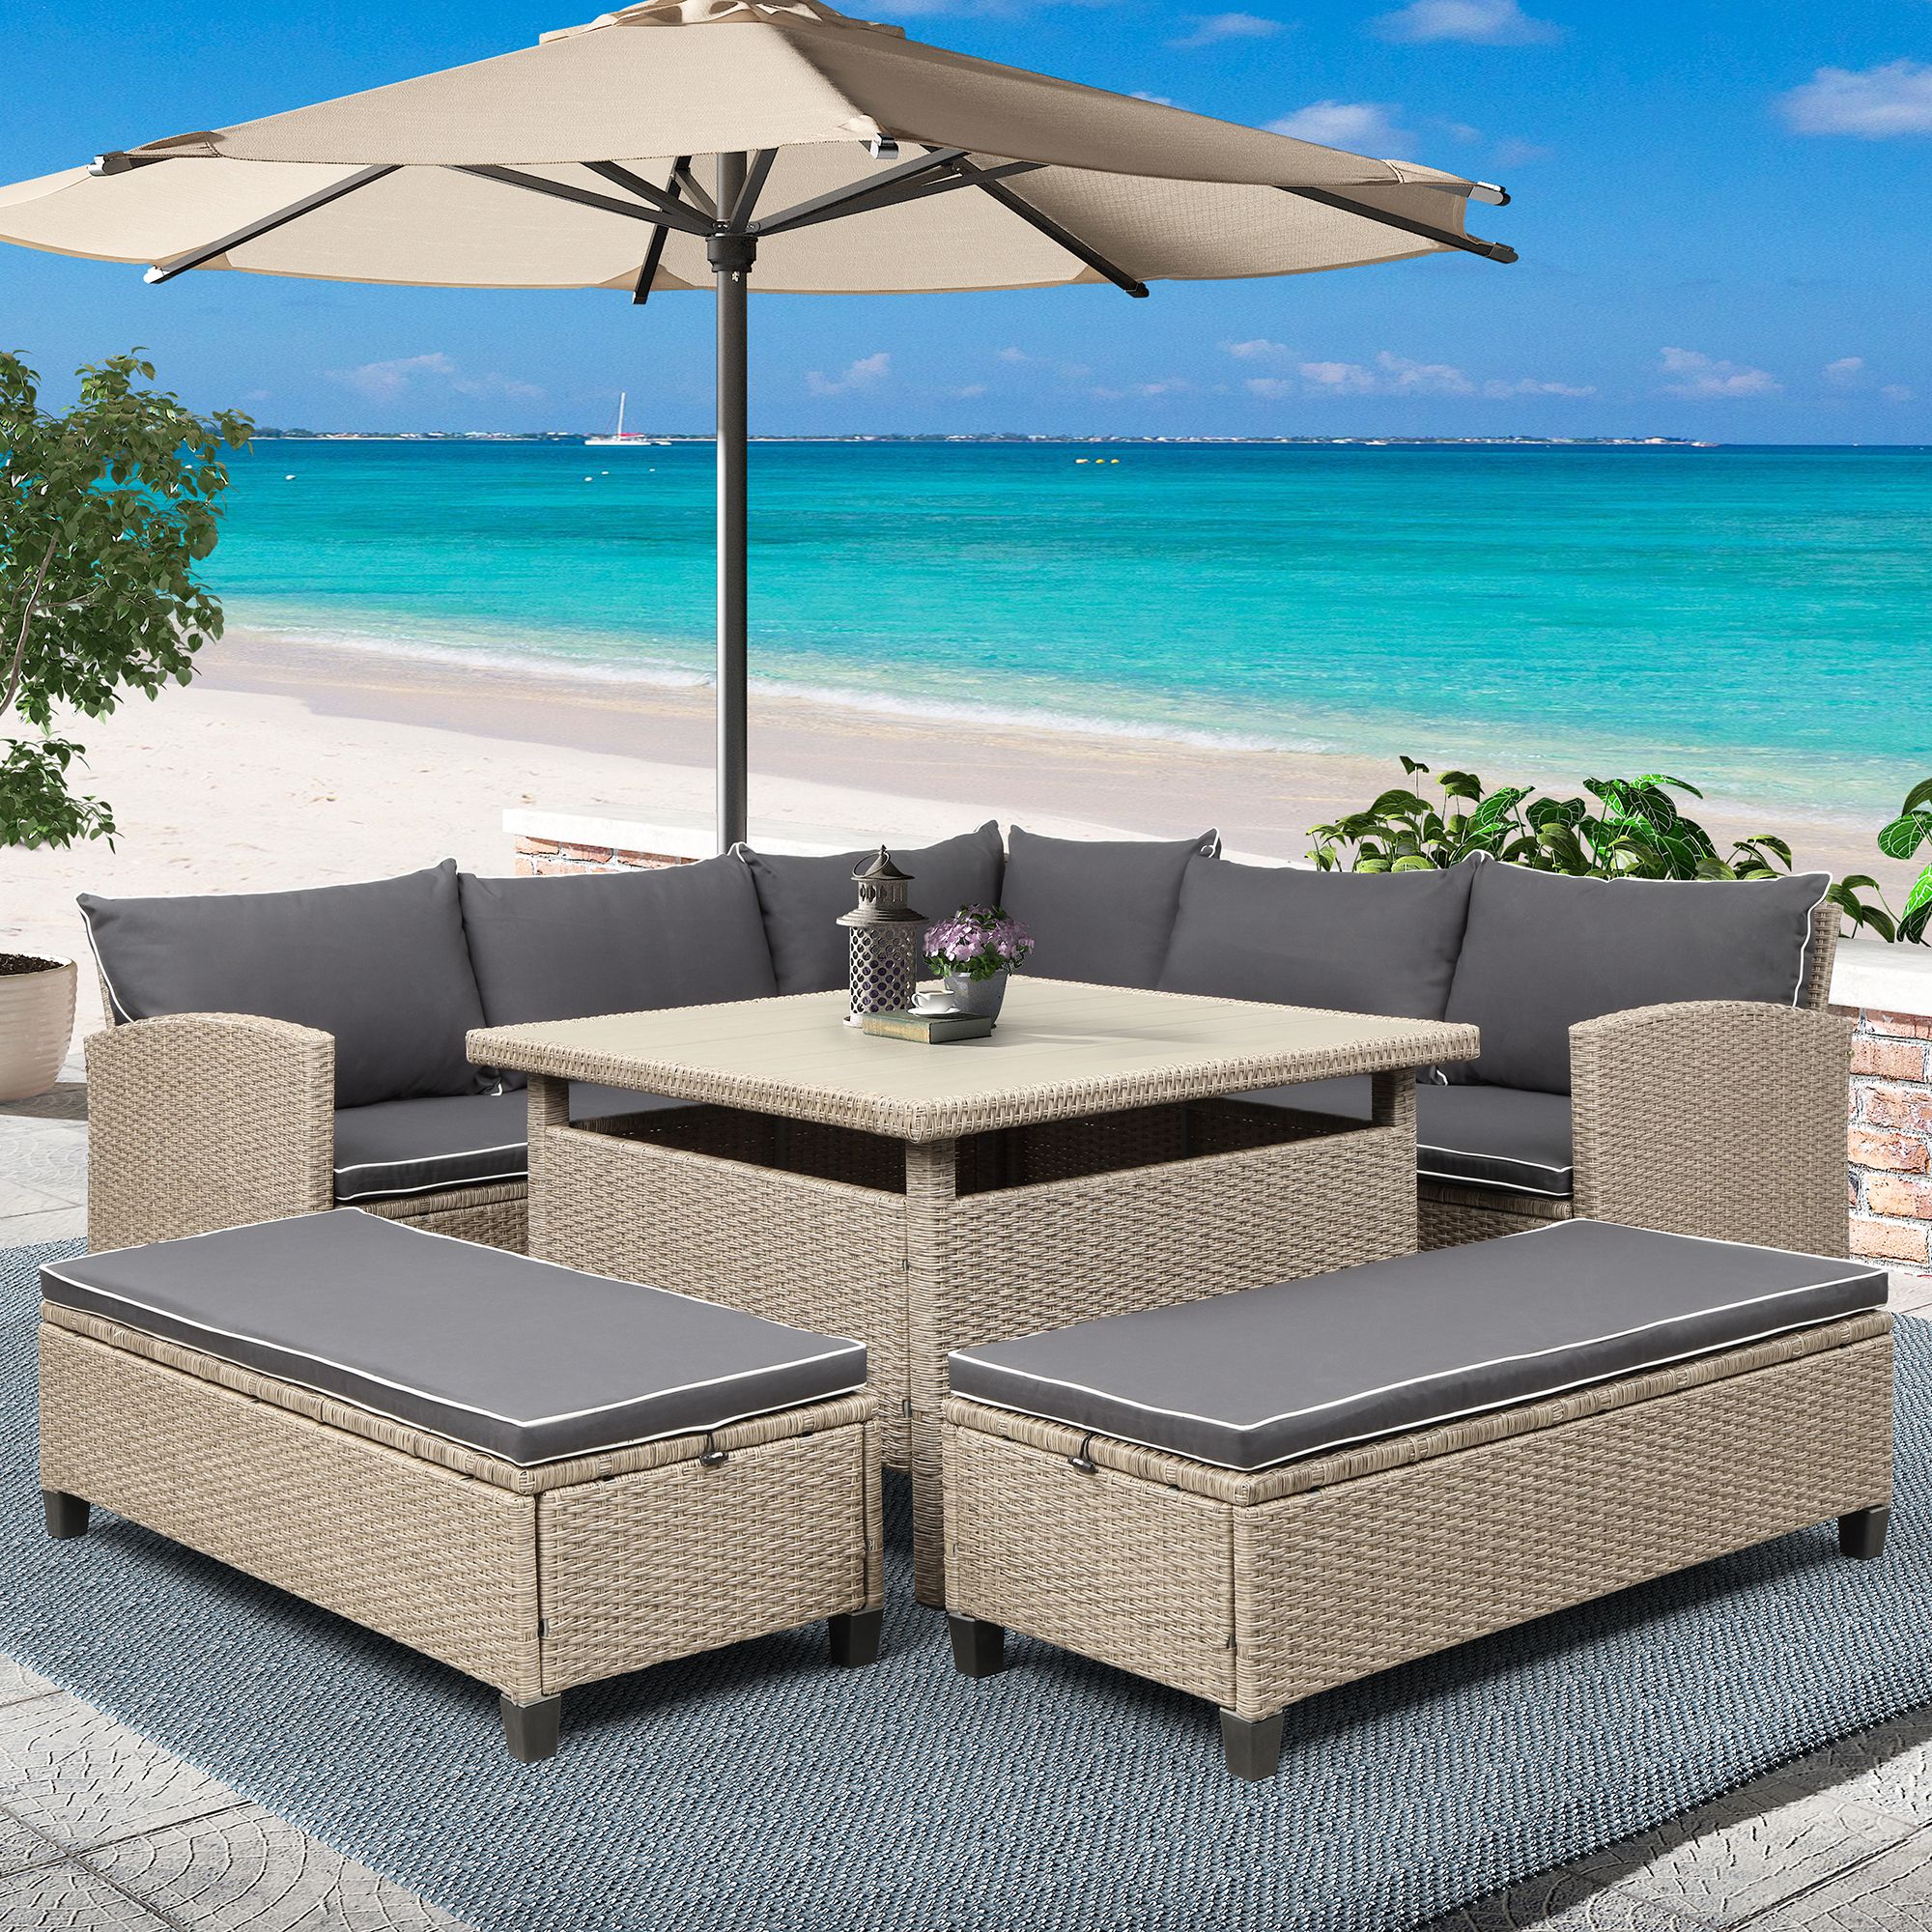 Outdoor Patio Furniture Sets, 6 Piece Ratten Wicker Sectional Sofa Set With Regard To 6 Piece Outdoor Sectional Sofa Patio Sets (View 3 of 15)